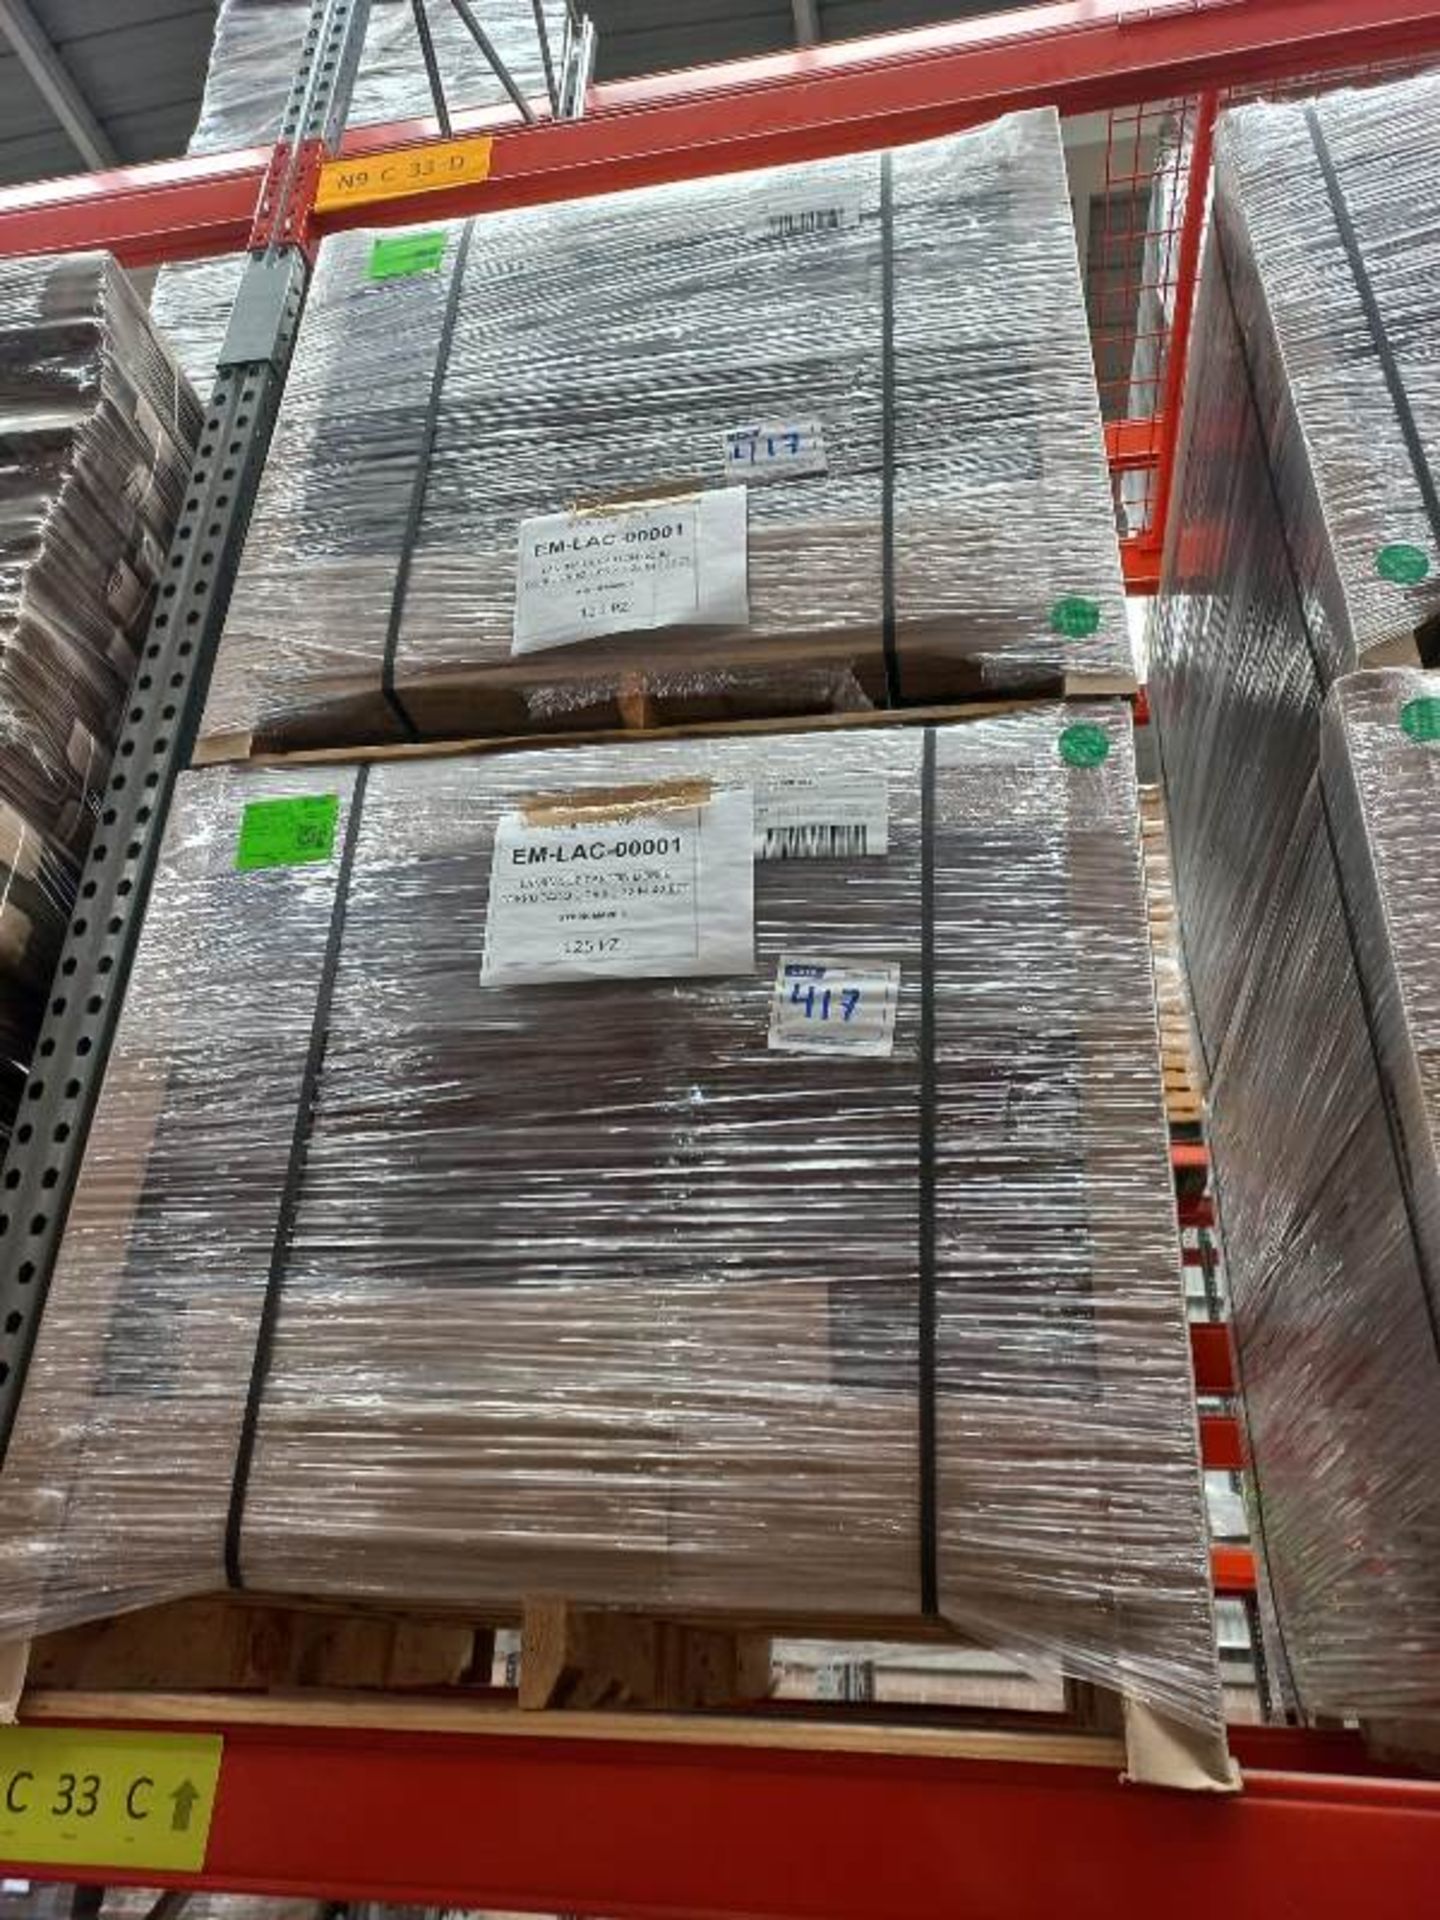 LOT OF APPROXIMATELY (83,310) PCS OF CARDBOARD BOXES AND ACCESSORIES - Image 107 of 119